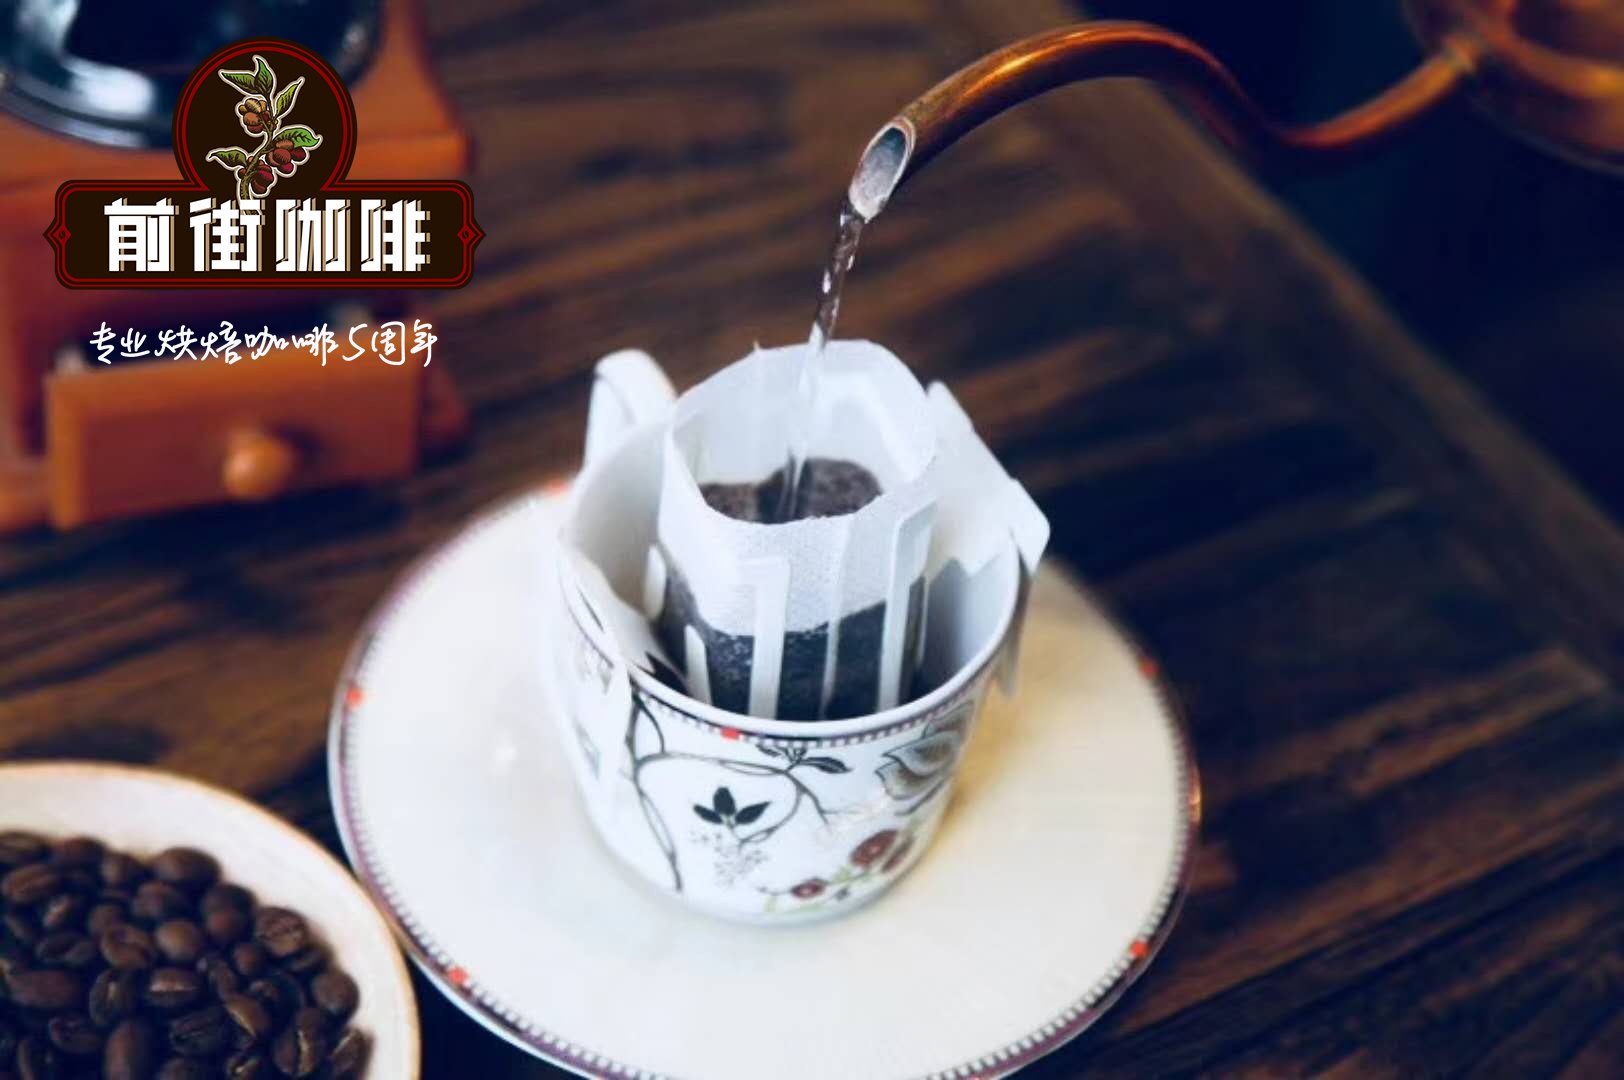 Qianjie coffee is worth 29.9 yuan and 10 packs in season! Candle awn flower butterfly gold manning 20% discount limited time discount